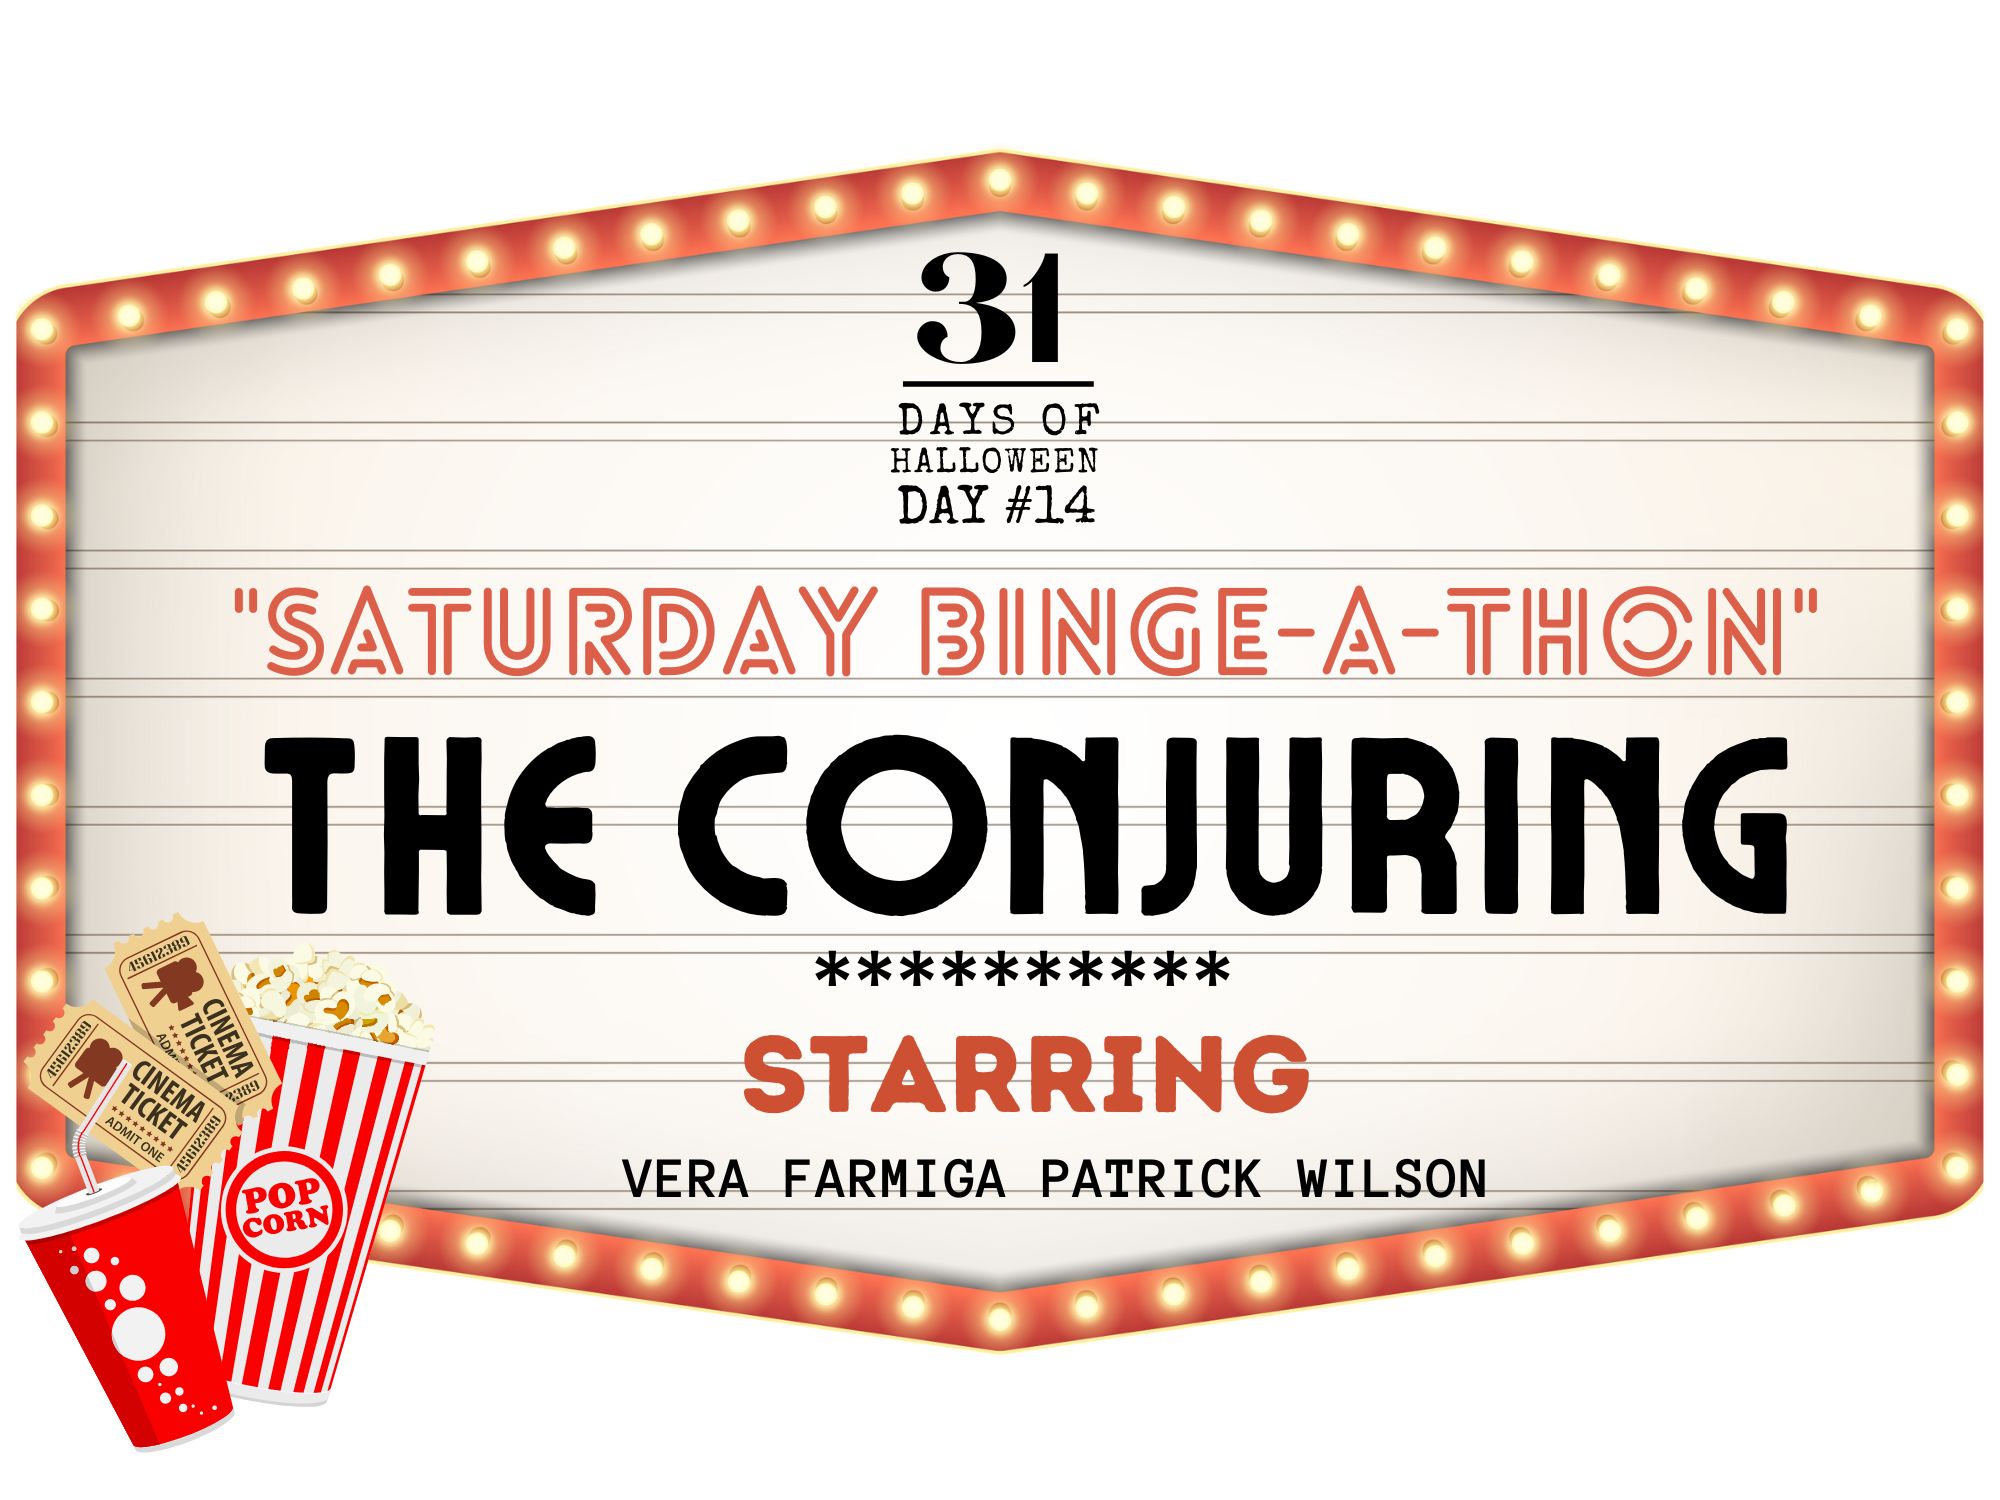 31 Days of Halloween: Day #14 Bing-A-thon, The Conjuring (Universe)